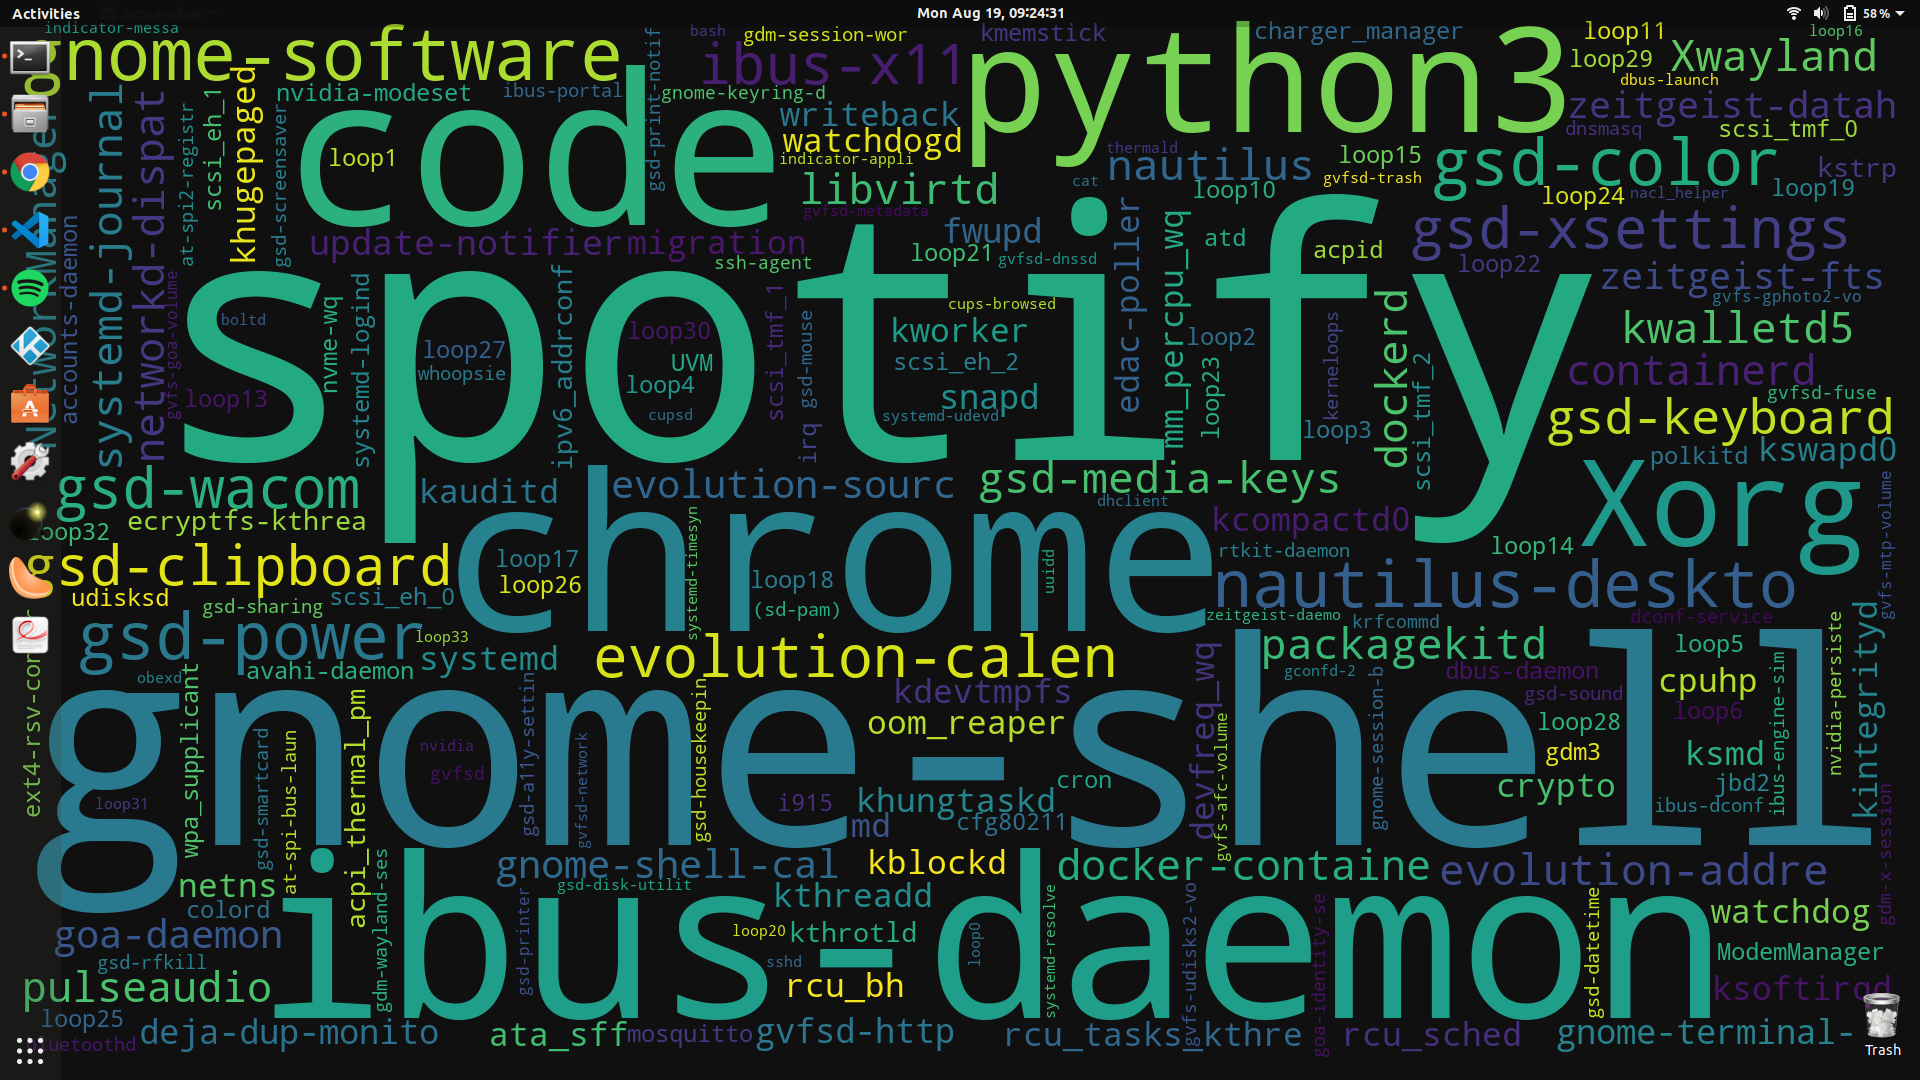 Github Anirudhajith Process Wallpaper Shell And Python Scripts That Set The Desktop Wallpaper To A Word Cloud Of The Most Resource Hungry Processes